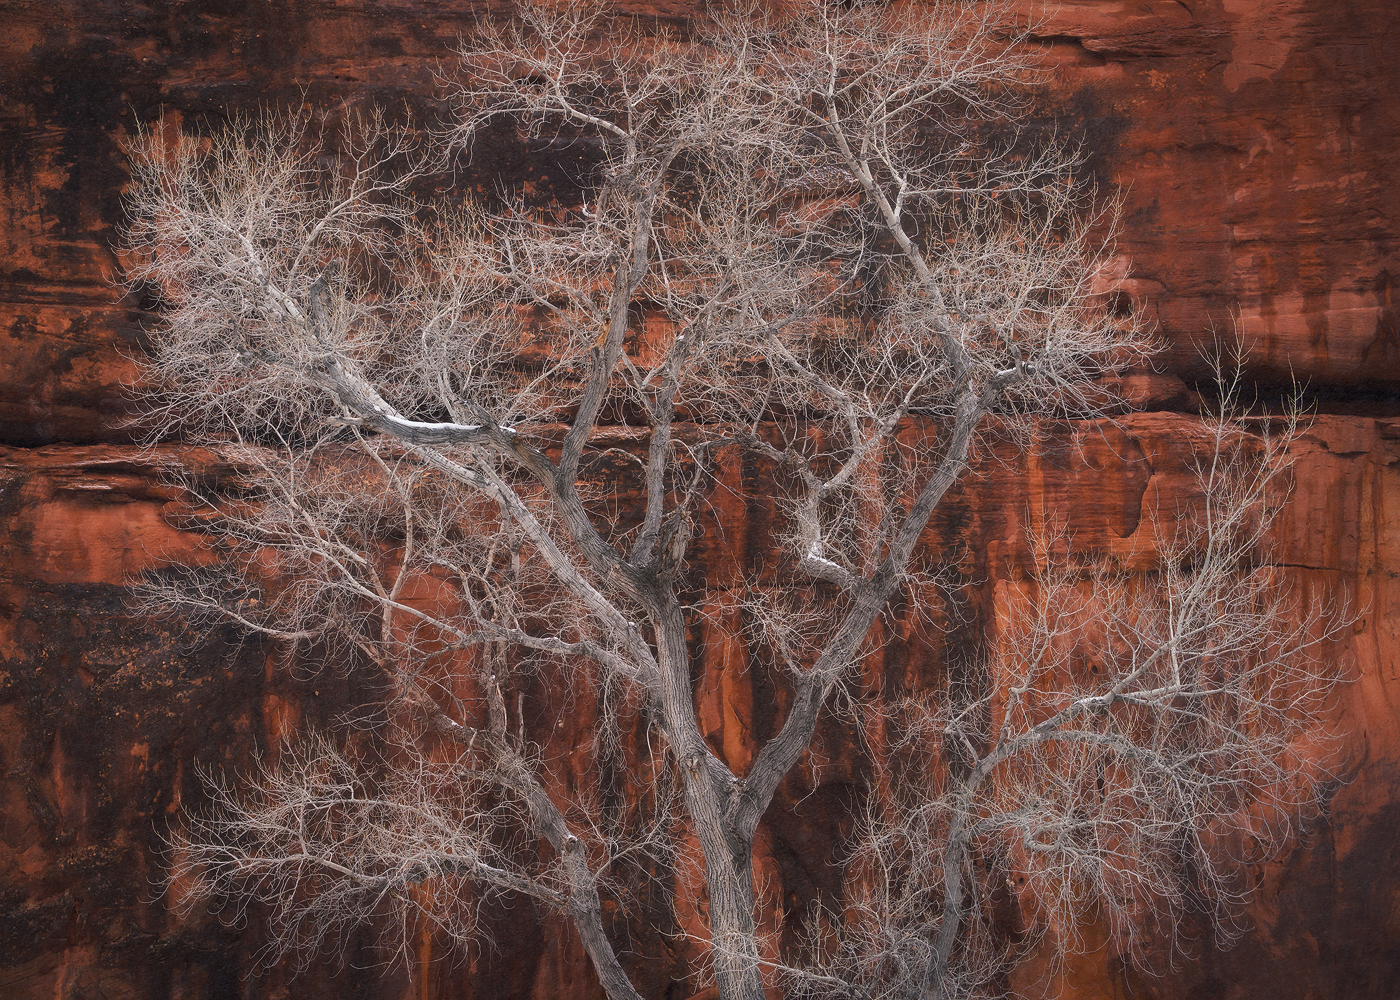 Zion, Zion National Park, Utah, cottonwood, sandstone, red wall, winter, canyon